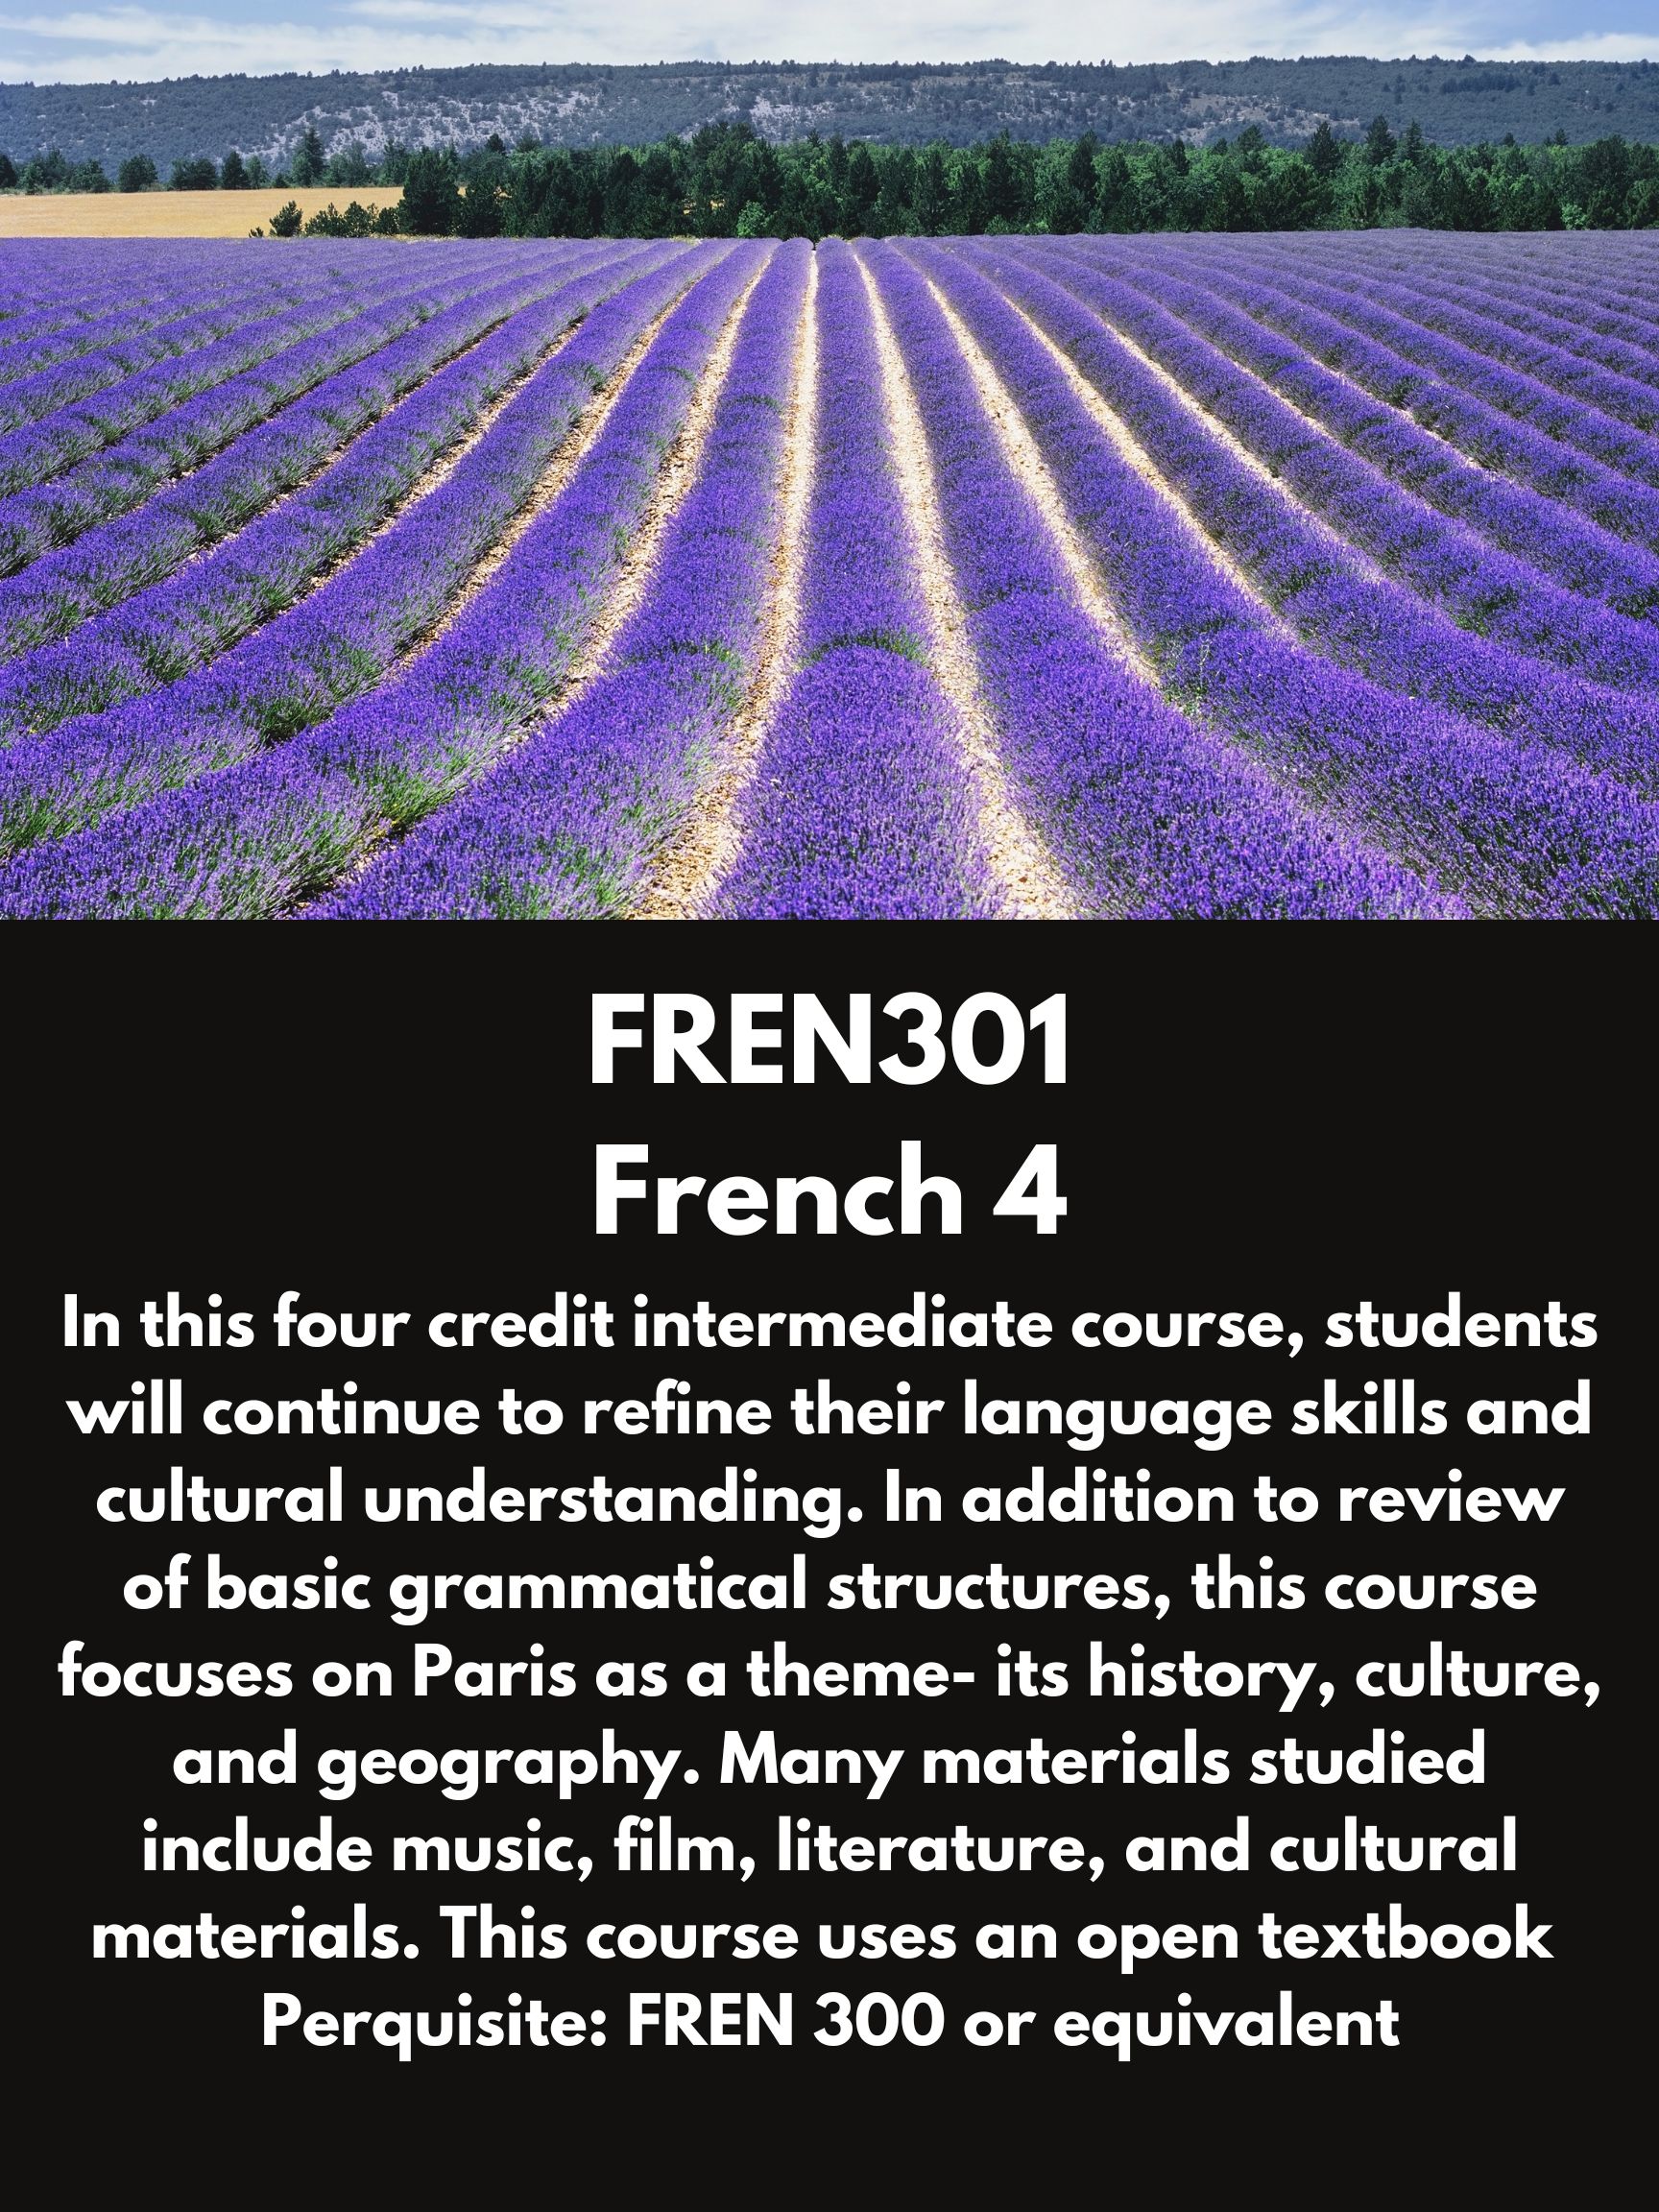 FREN301 French 4. In this four credit intermediate course, students will continue to refine their language skills and cultural understanding. In addition to review of basic grammatical structures, this course focuses on Paris as a theme- its history, culture, and geography. Many materials studied include music, film, literature, and cultural materials. This course uses an open textbook  Perquisite: FREN 300 or equivalent